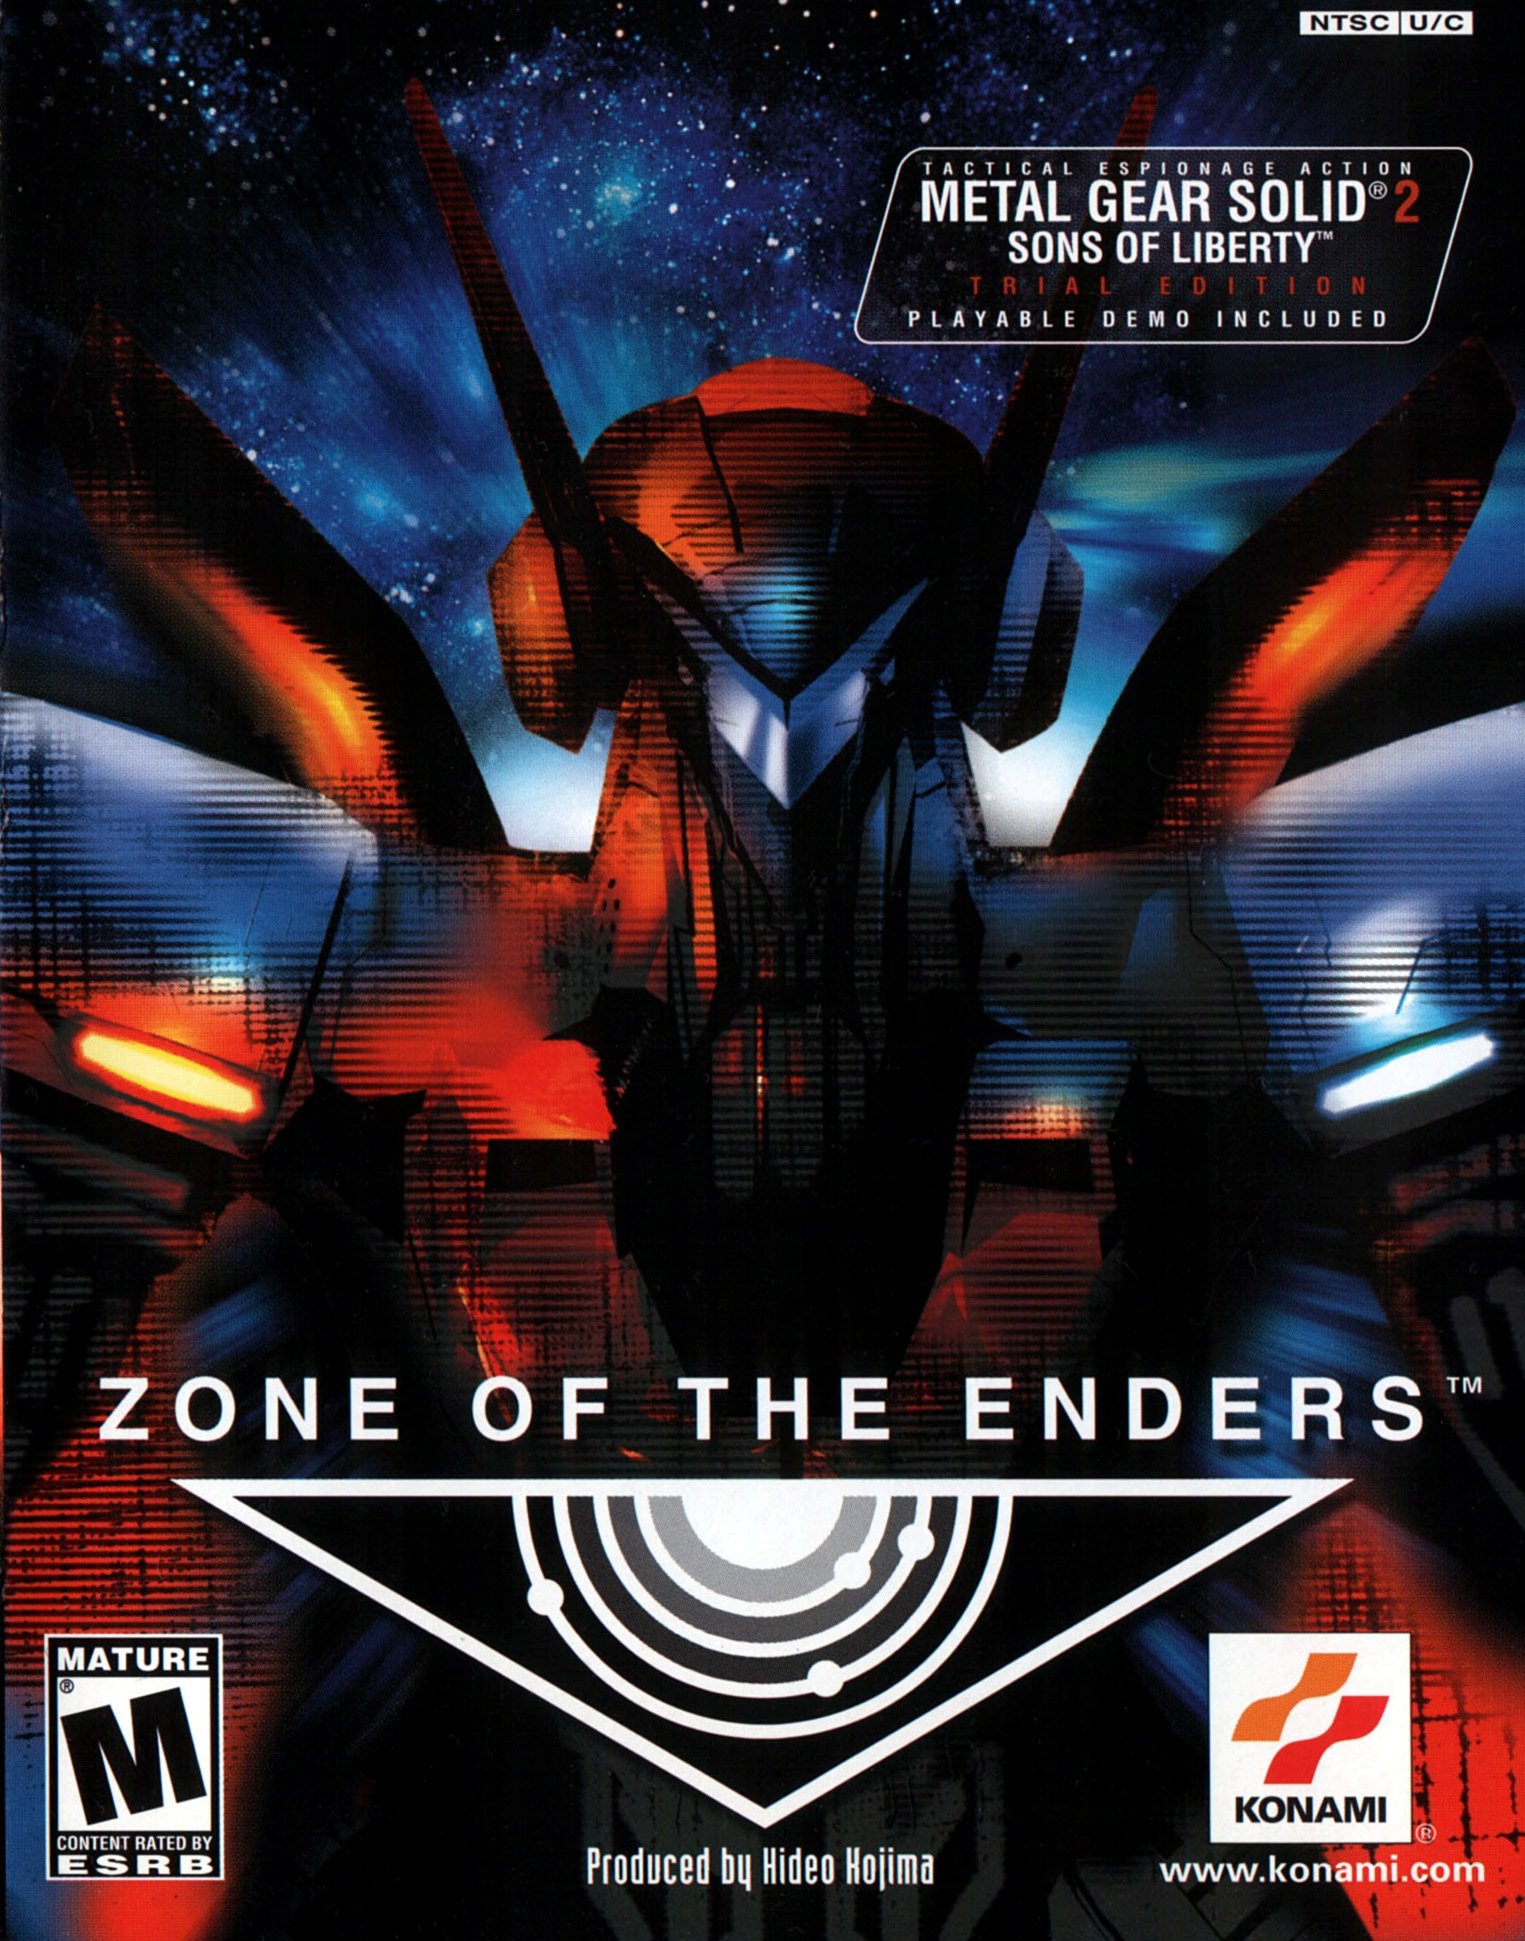 Image of Zone of the Enders